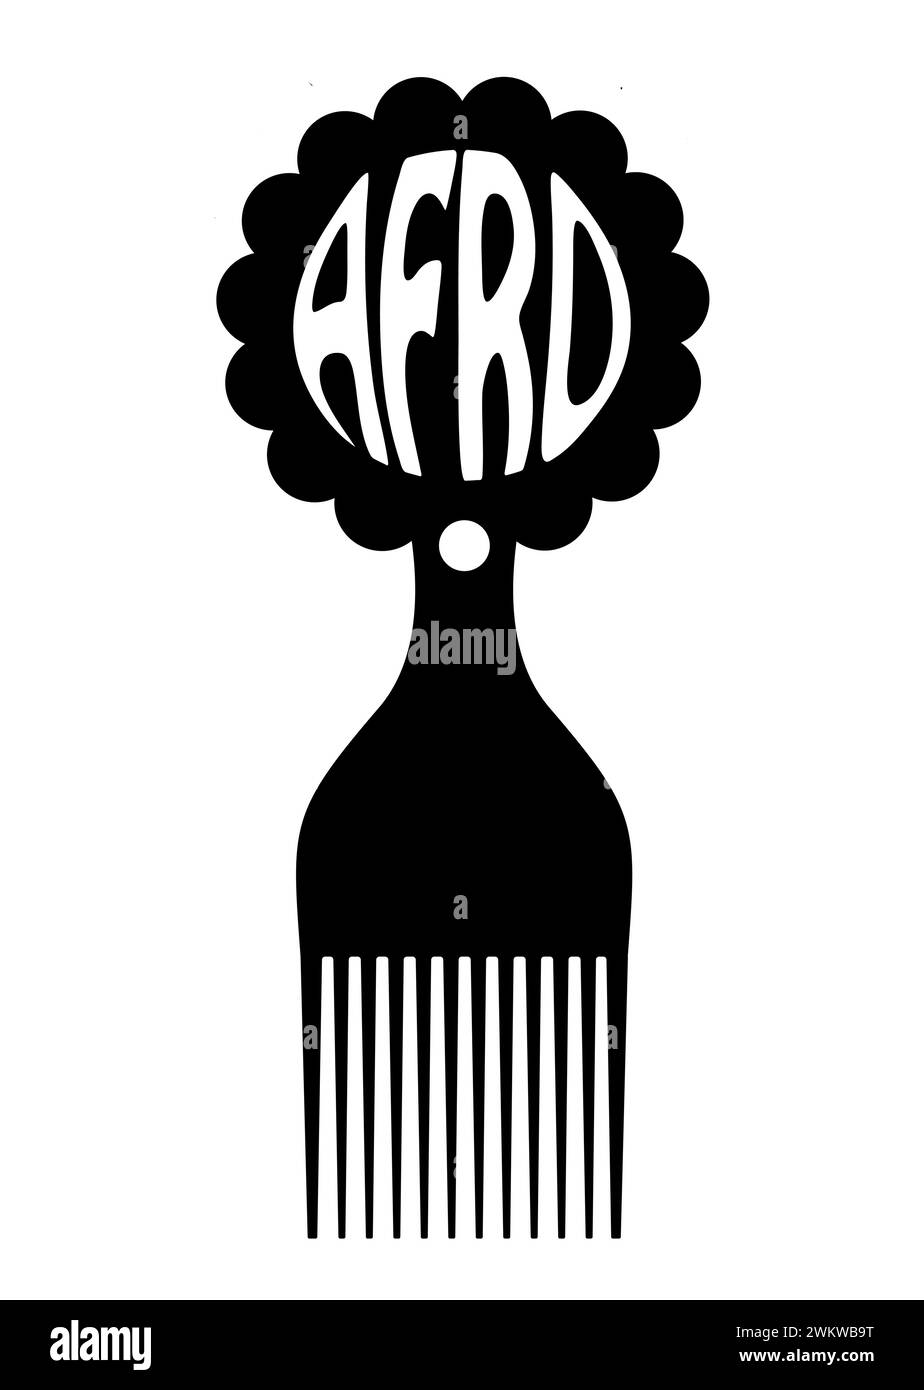 afro comb symbol, african hairbrush sign for curly hair, simple flat design of black silhouette with Afro text writing, vector illustration isolated Stock Vector